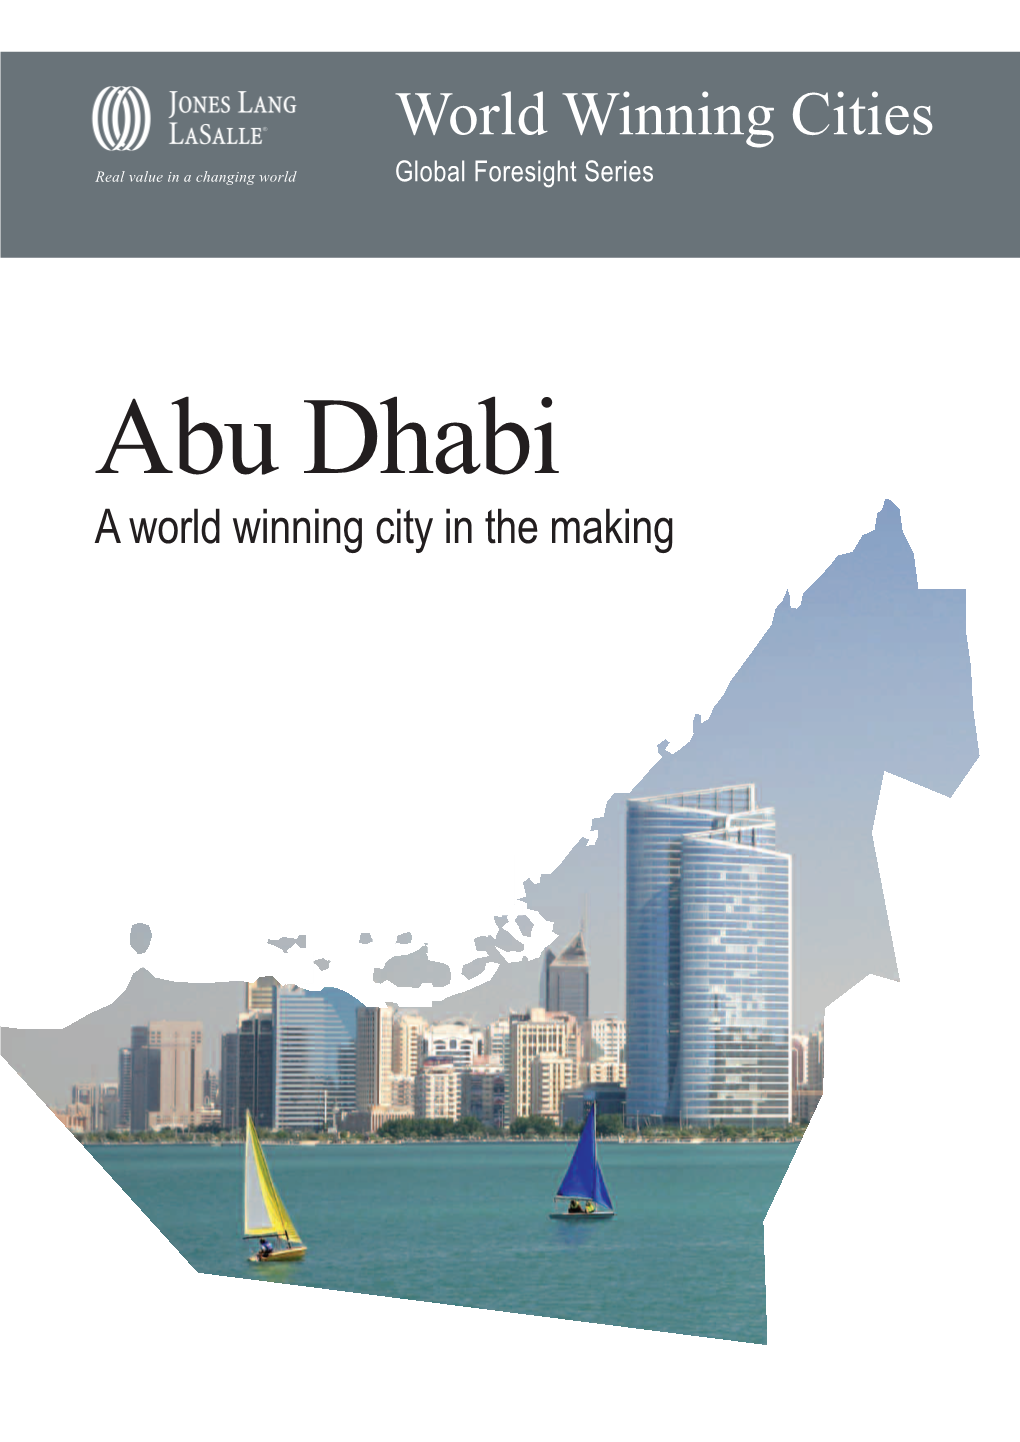 Abu Dhabi Skyline Assessment of the Key Drivers of City Success